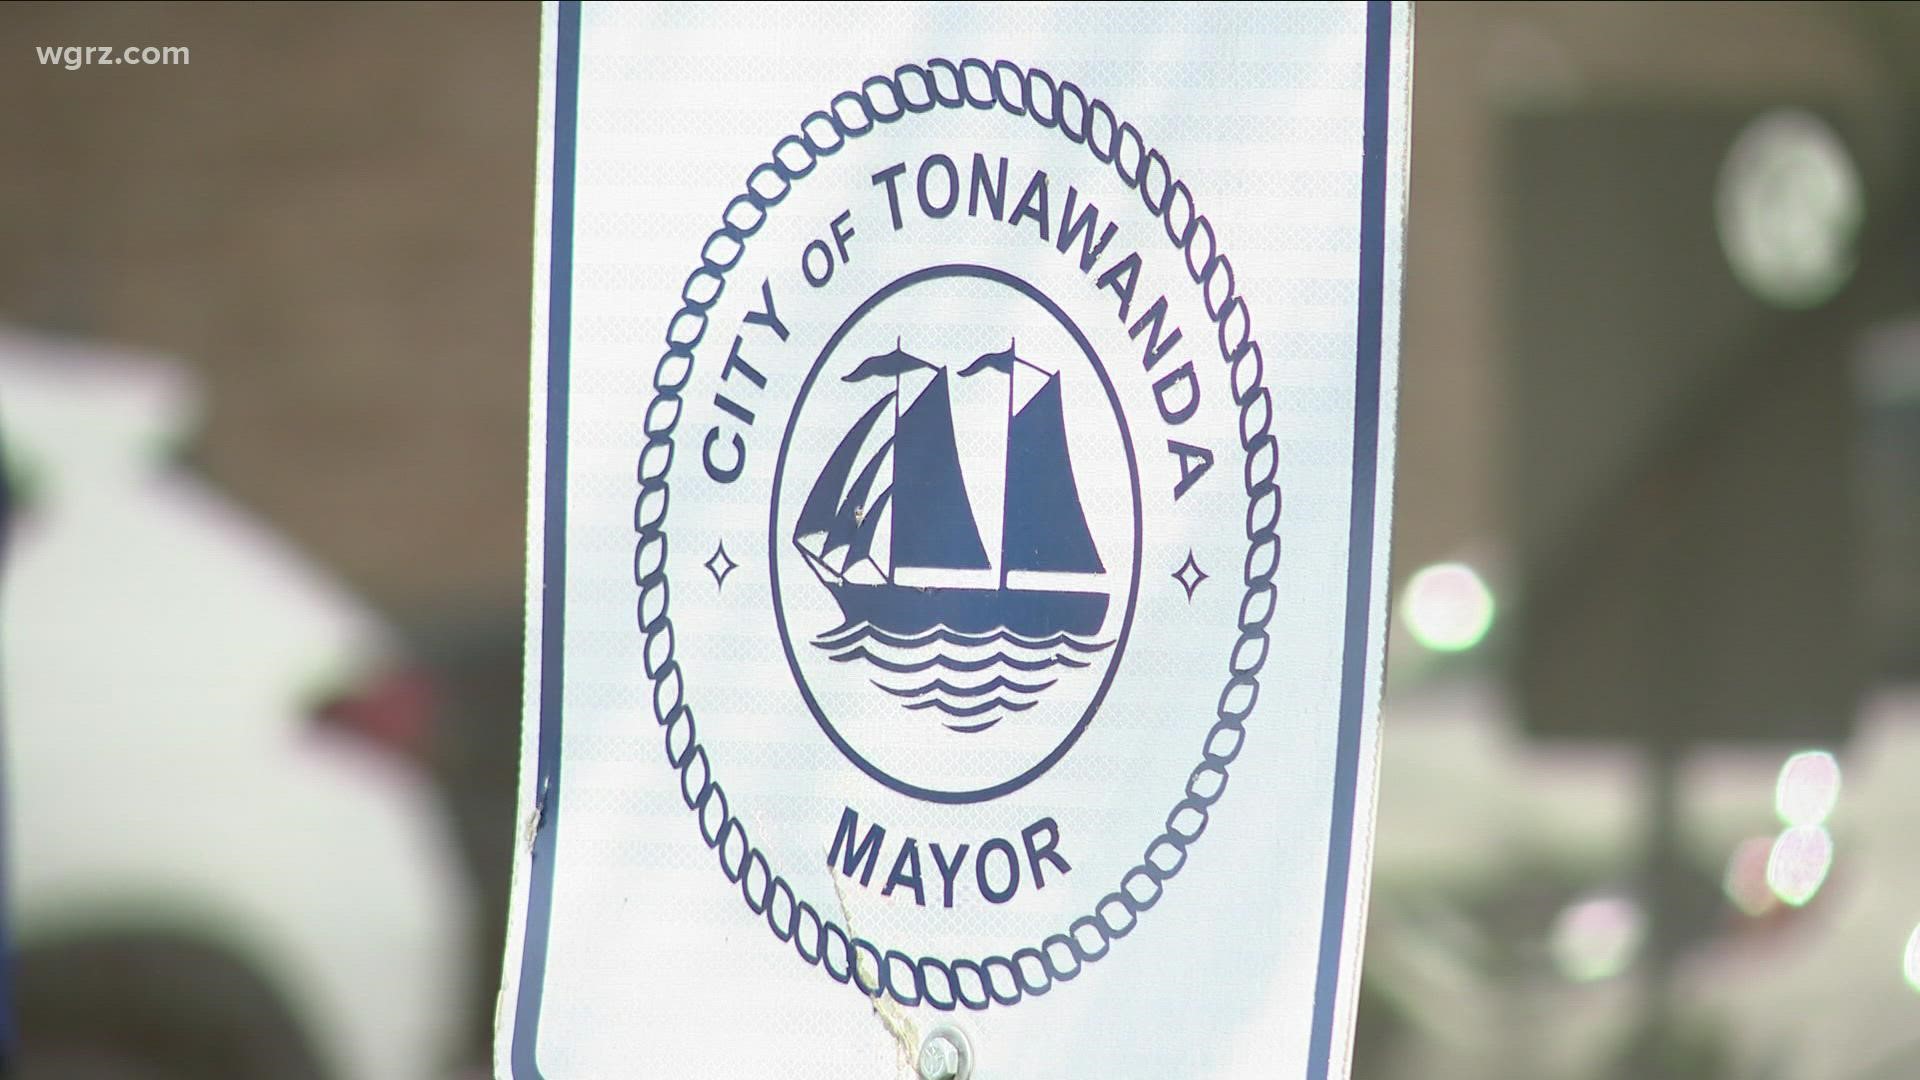 The city of Tonawanda has been at the center of a controversy, as city officials will not close tomorrow in observance of Juneteenth.